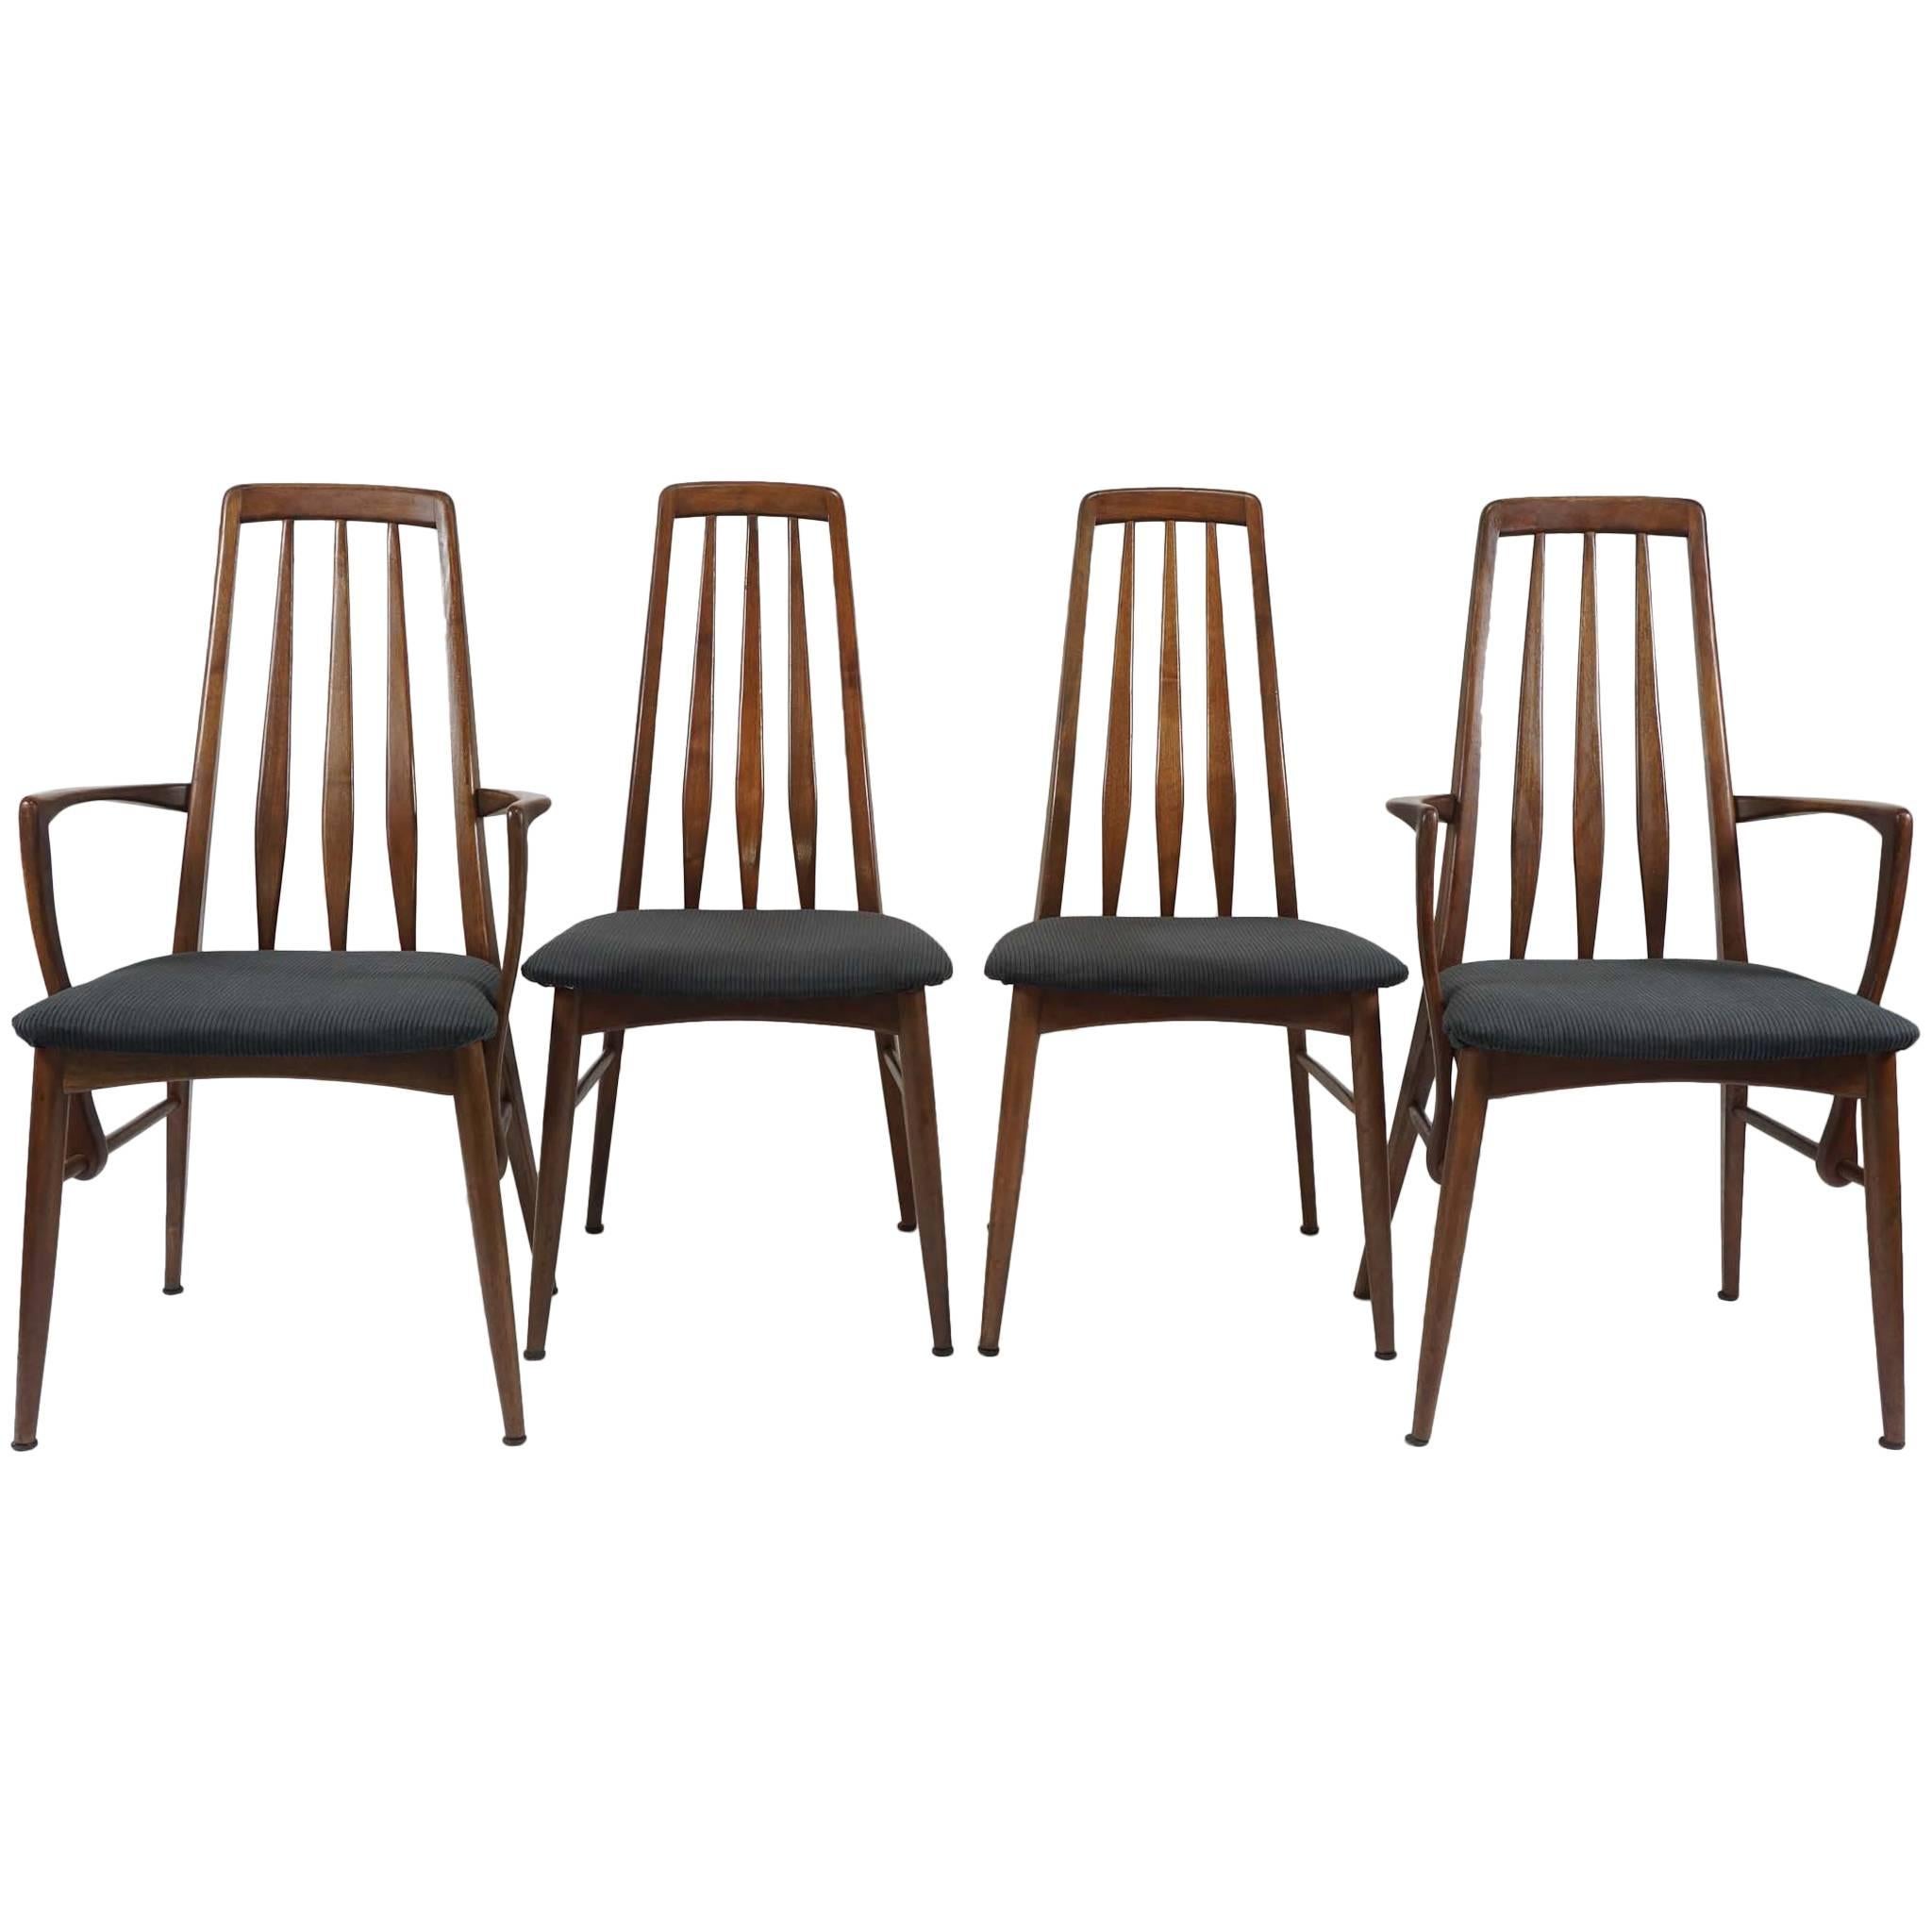 Set of Four Niels Koefoed for Hornslet Dining Chairs